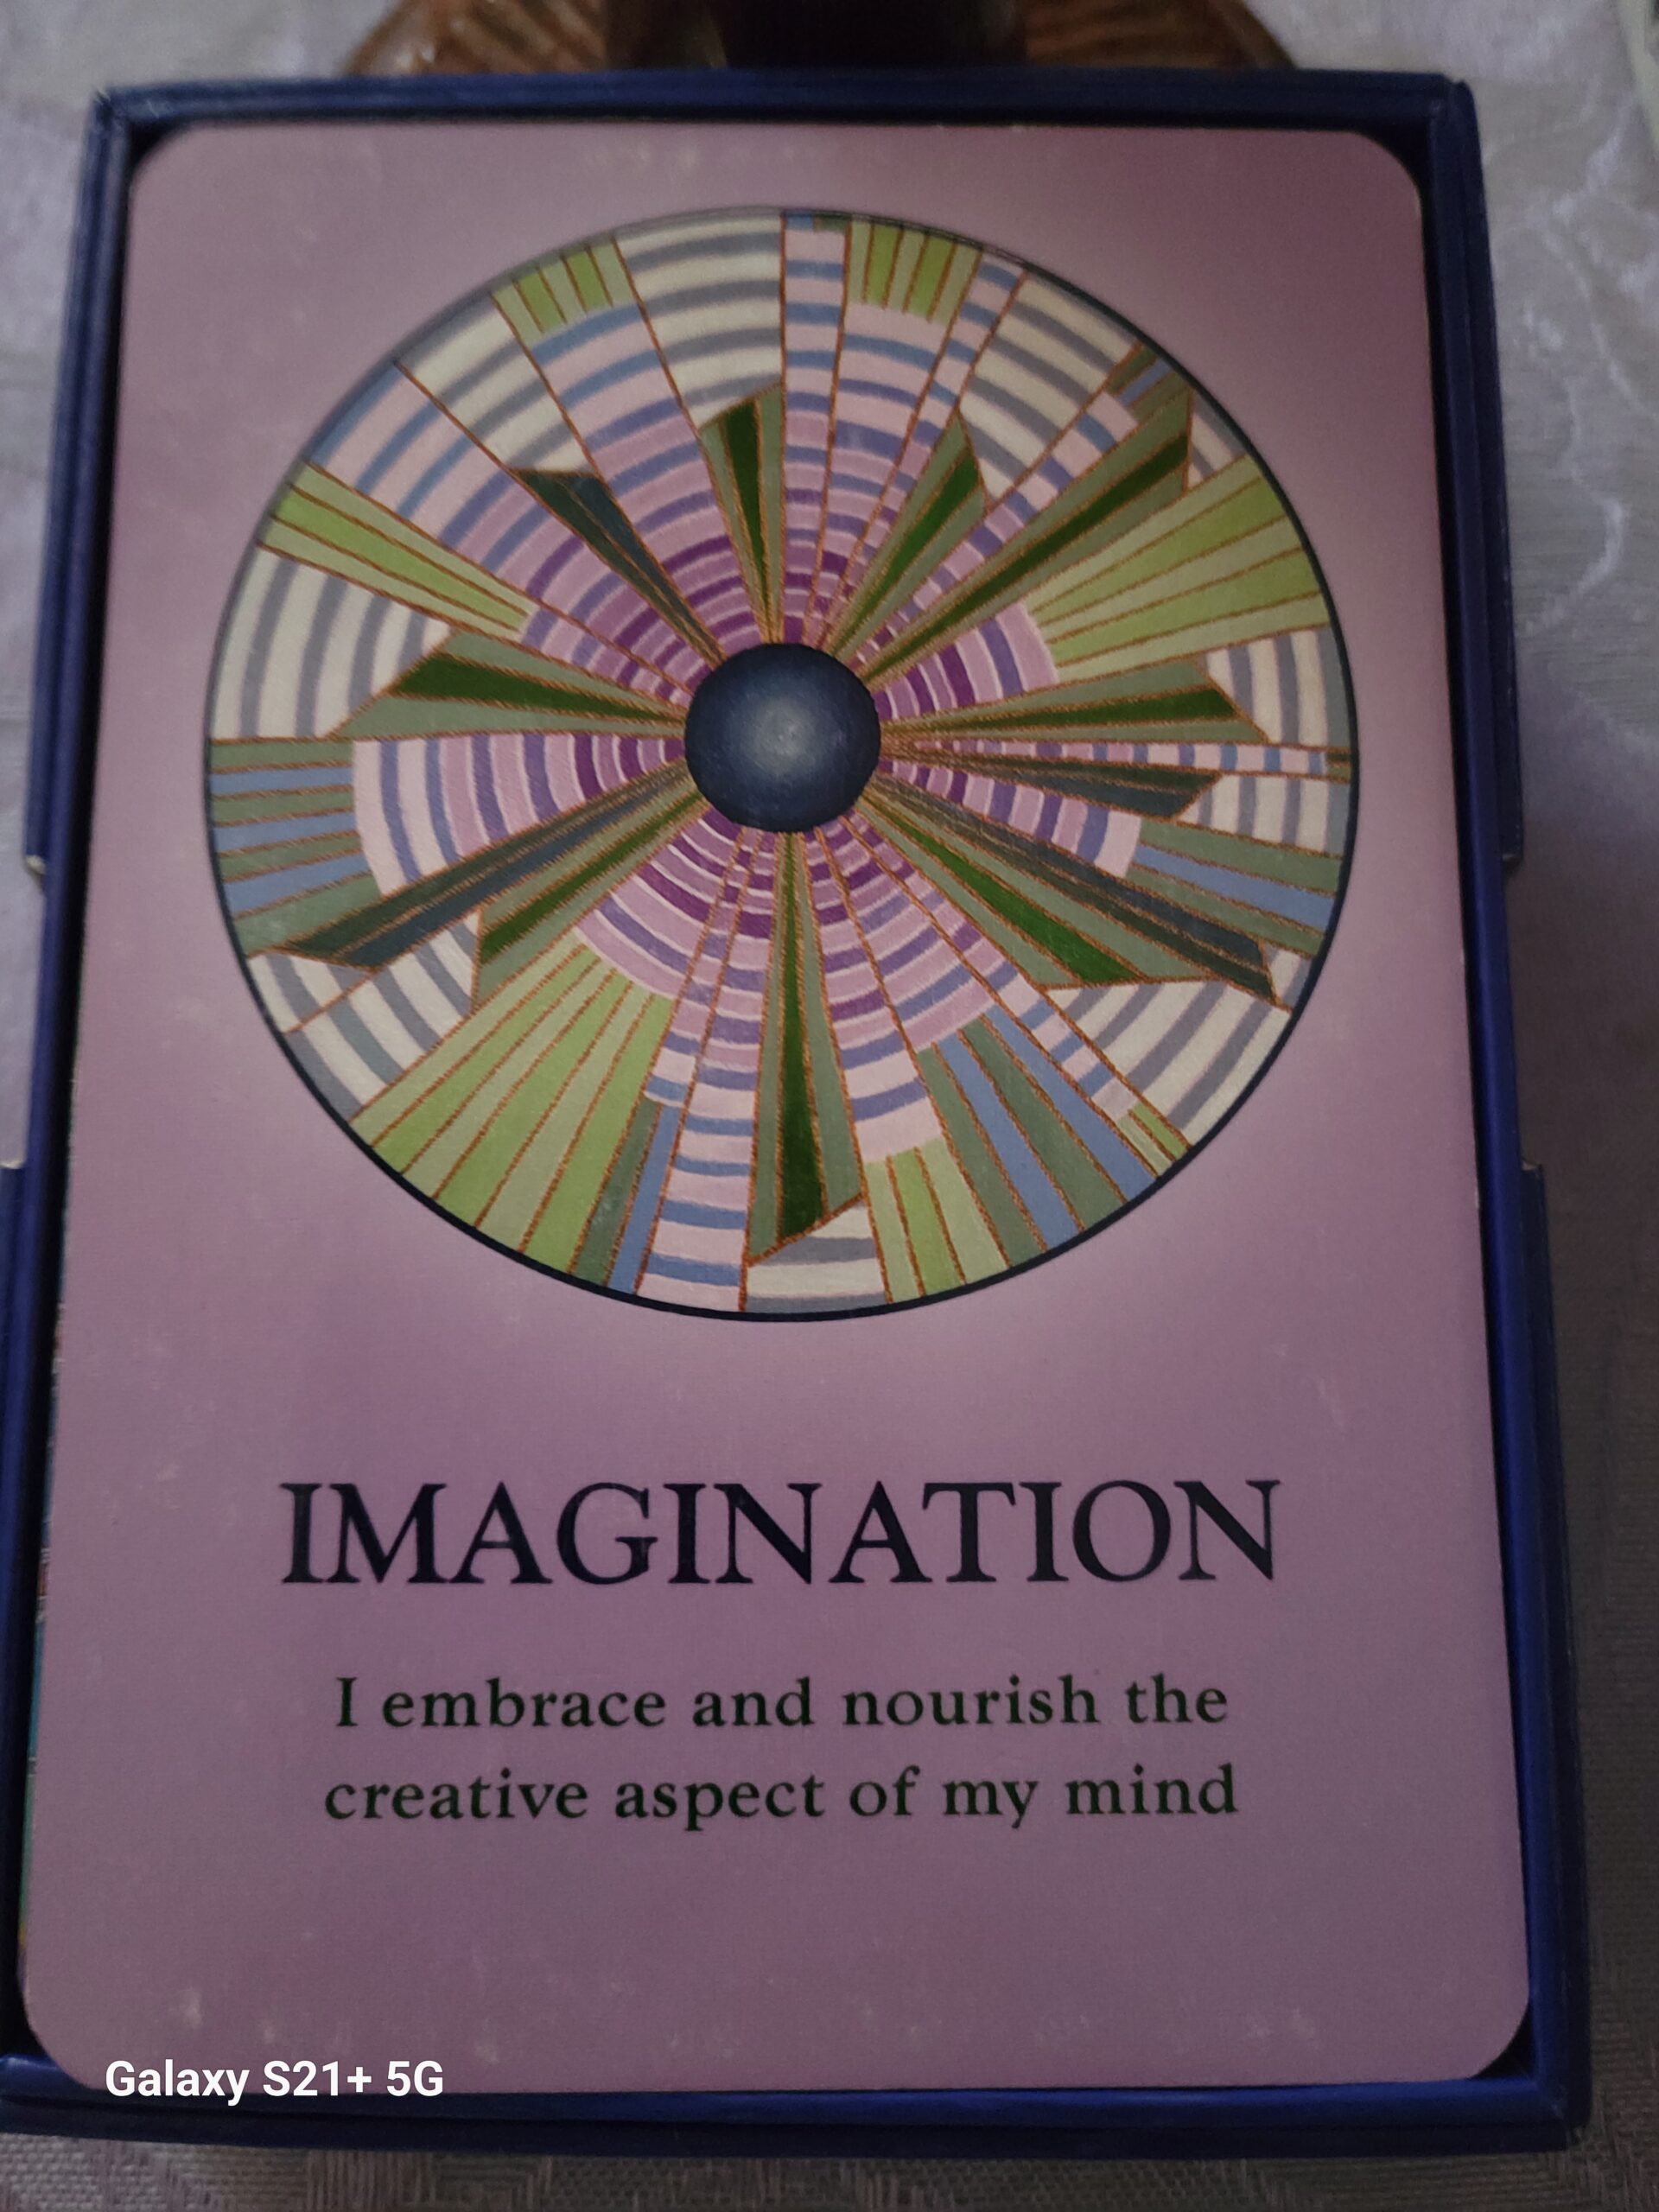 Daily Card Readings – Imagination